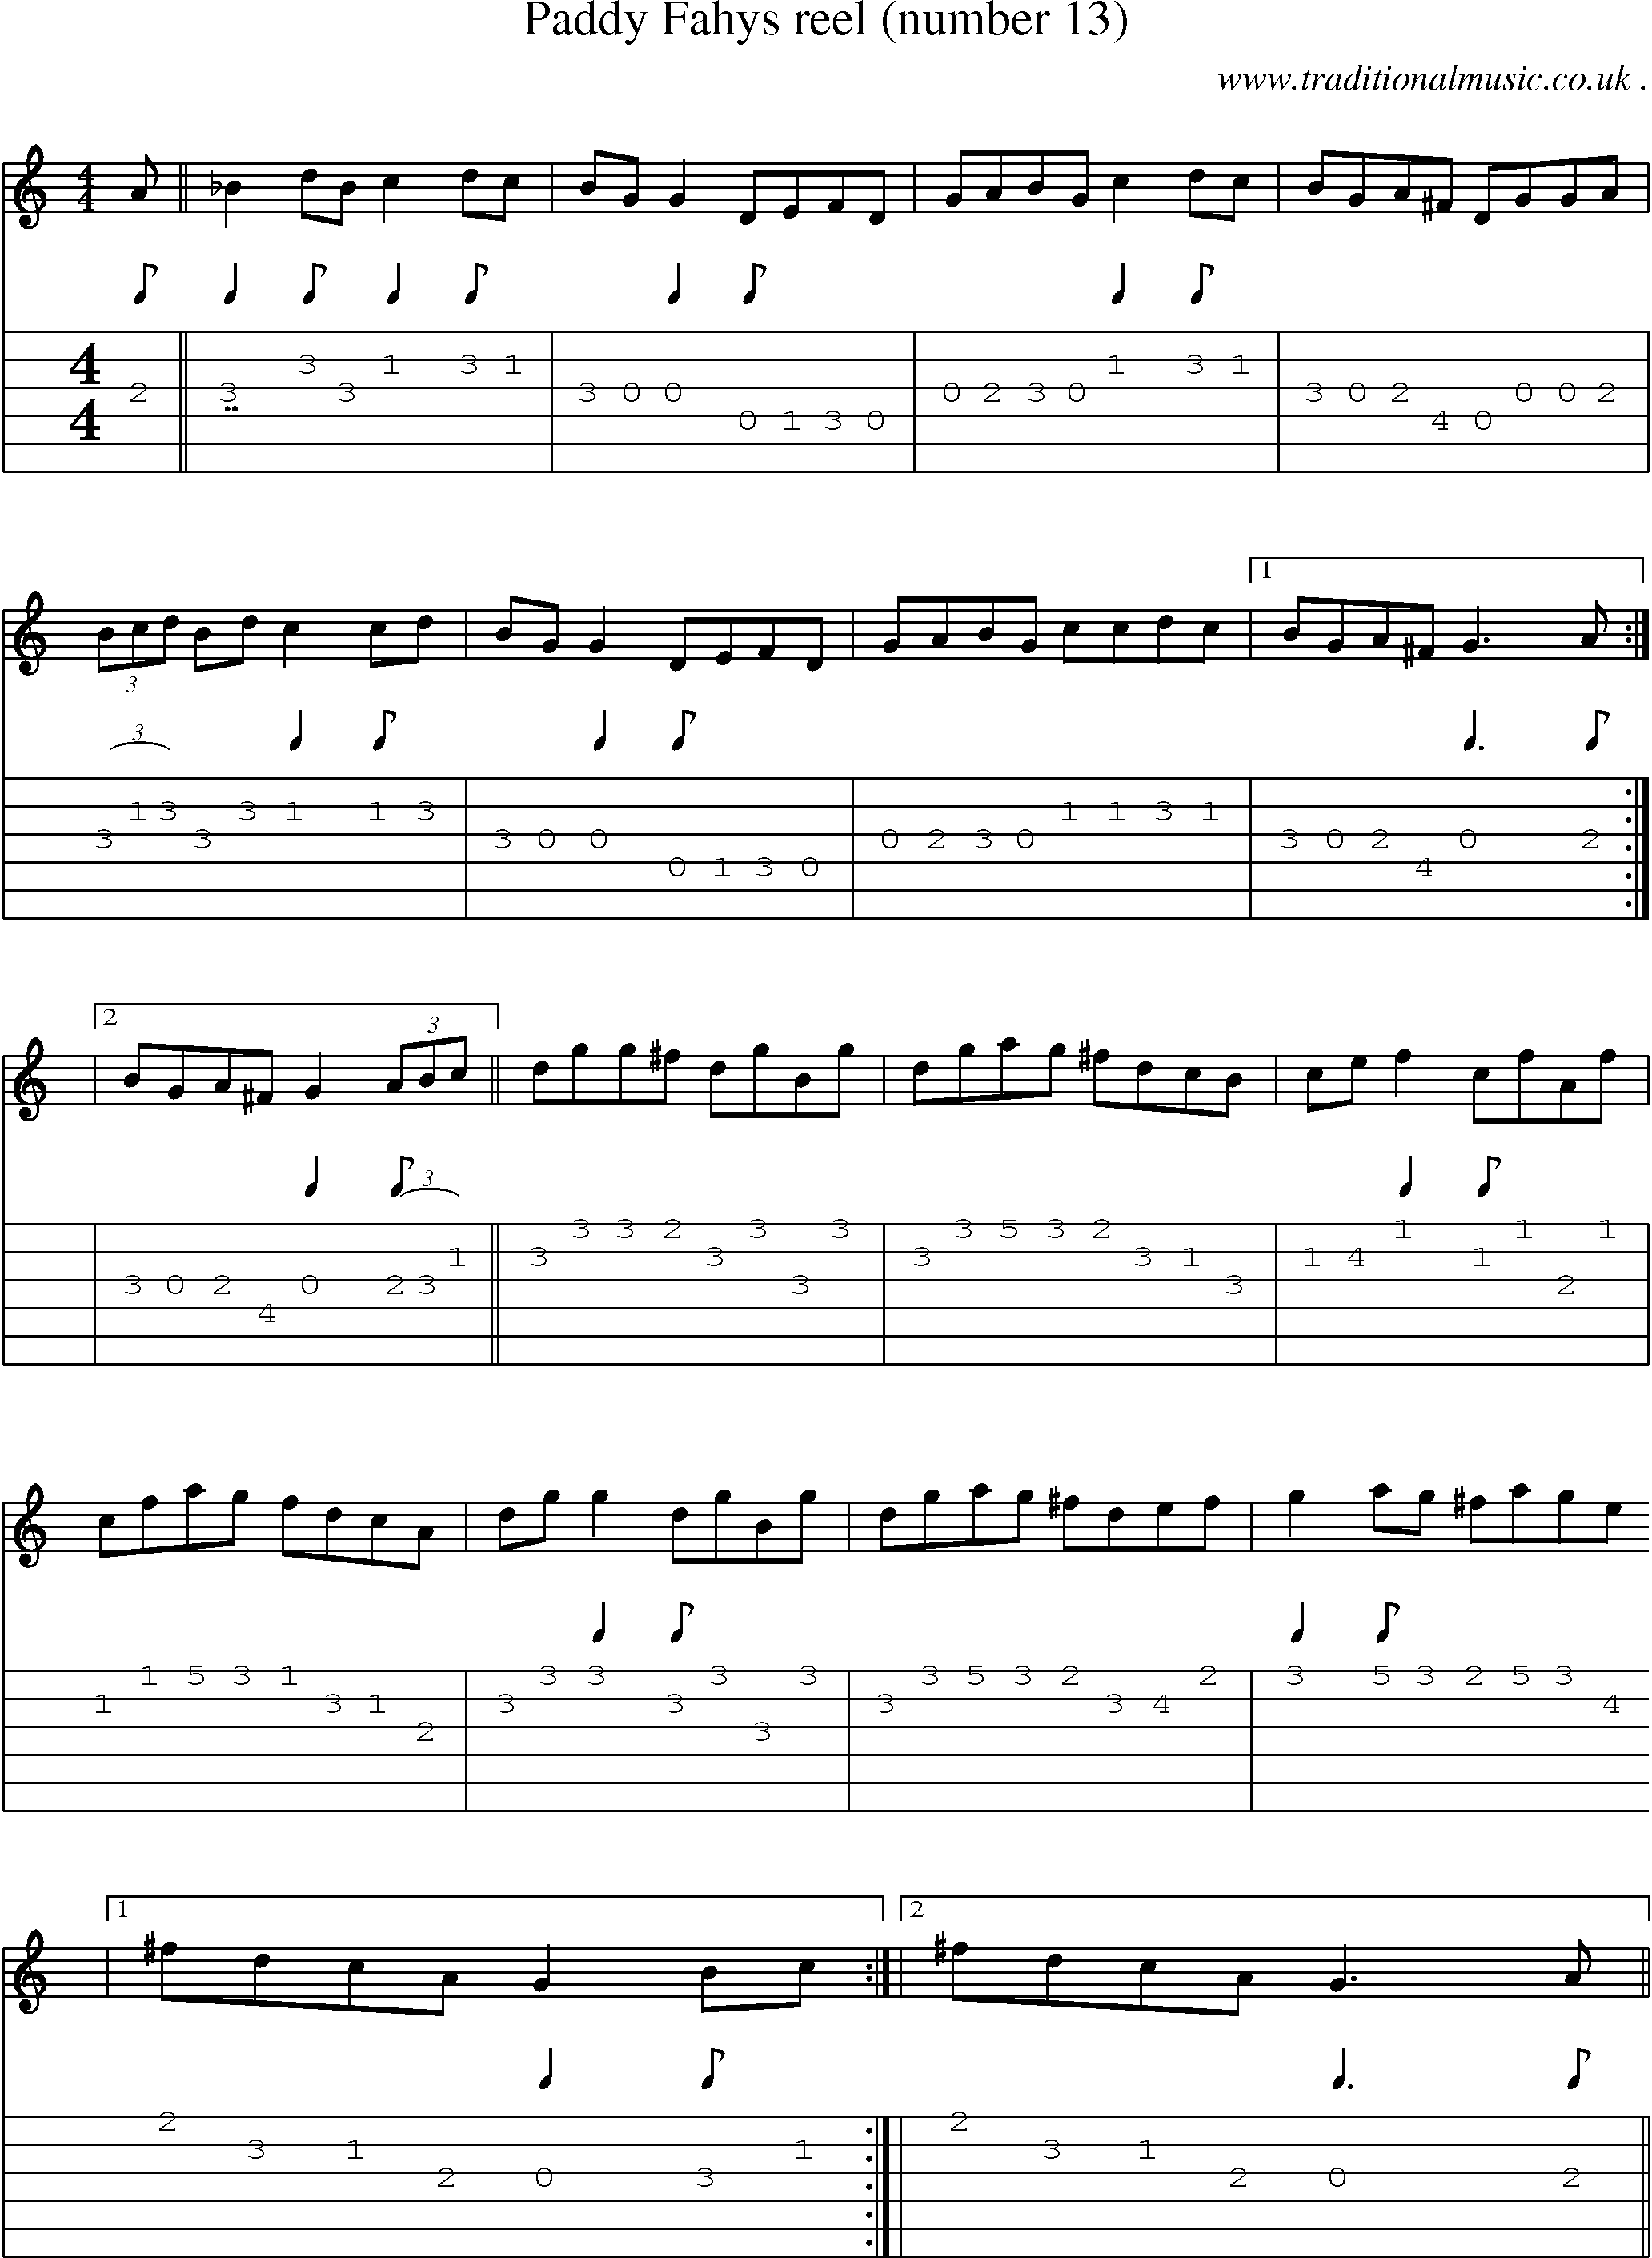 Sheet-Music and Guitar Tabs for Paddy Fahys Reel (number 13)